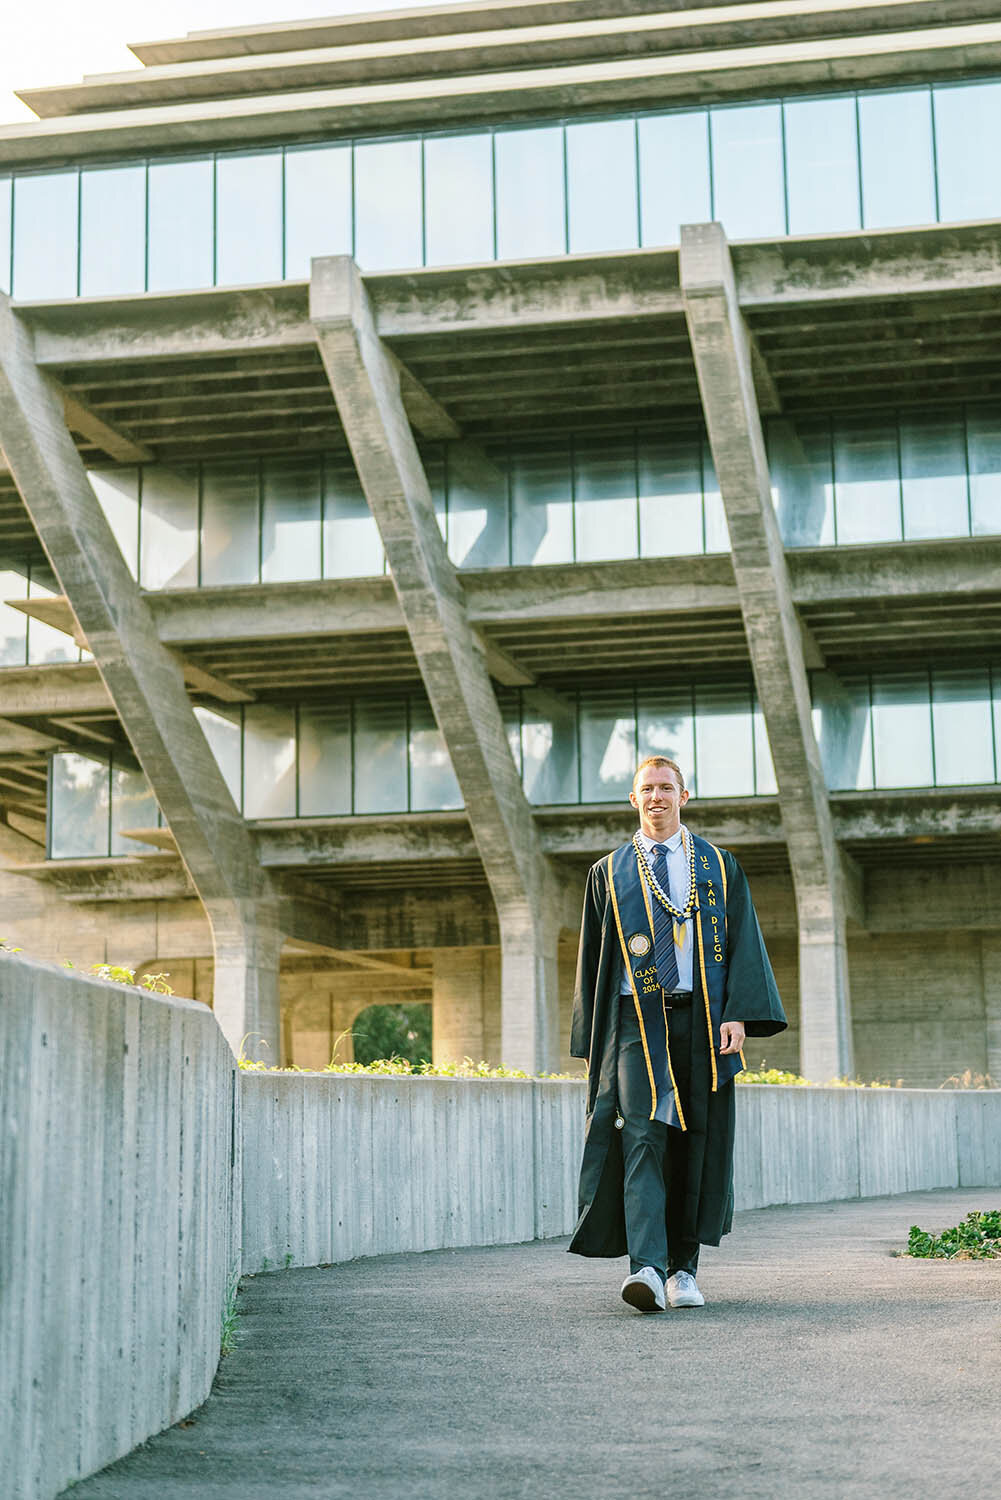 UCSD graduate wearing cap and gown walking away from Geisel Library